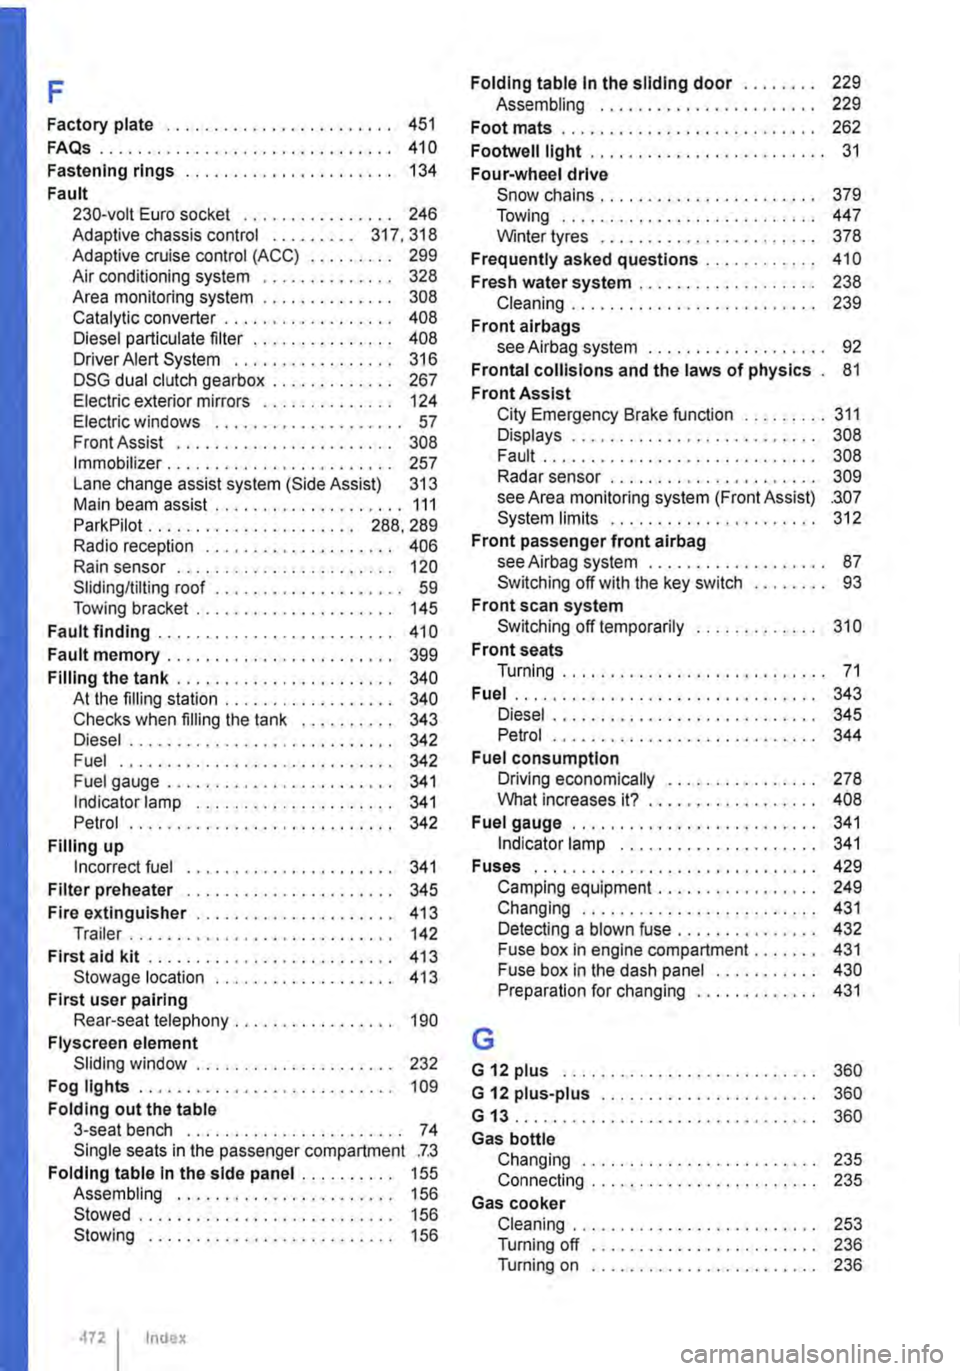 VOLKSWAGEN TRANSPORTER 2014  Owners Manual F 
Factory plate . . . . . . . . . . . . . . . . . . . . . . . . 451 
FAQs . . . . . . . . . . . . . . . . . . . . . . . . . . . . . . . 410 
Fastening rings . . . . . . . . . . . . . . . . . . • . 